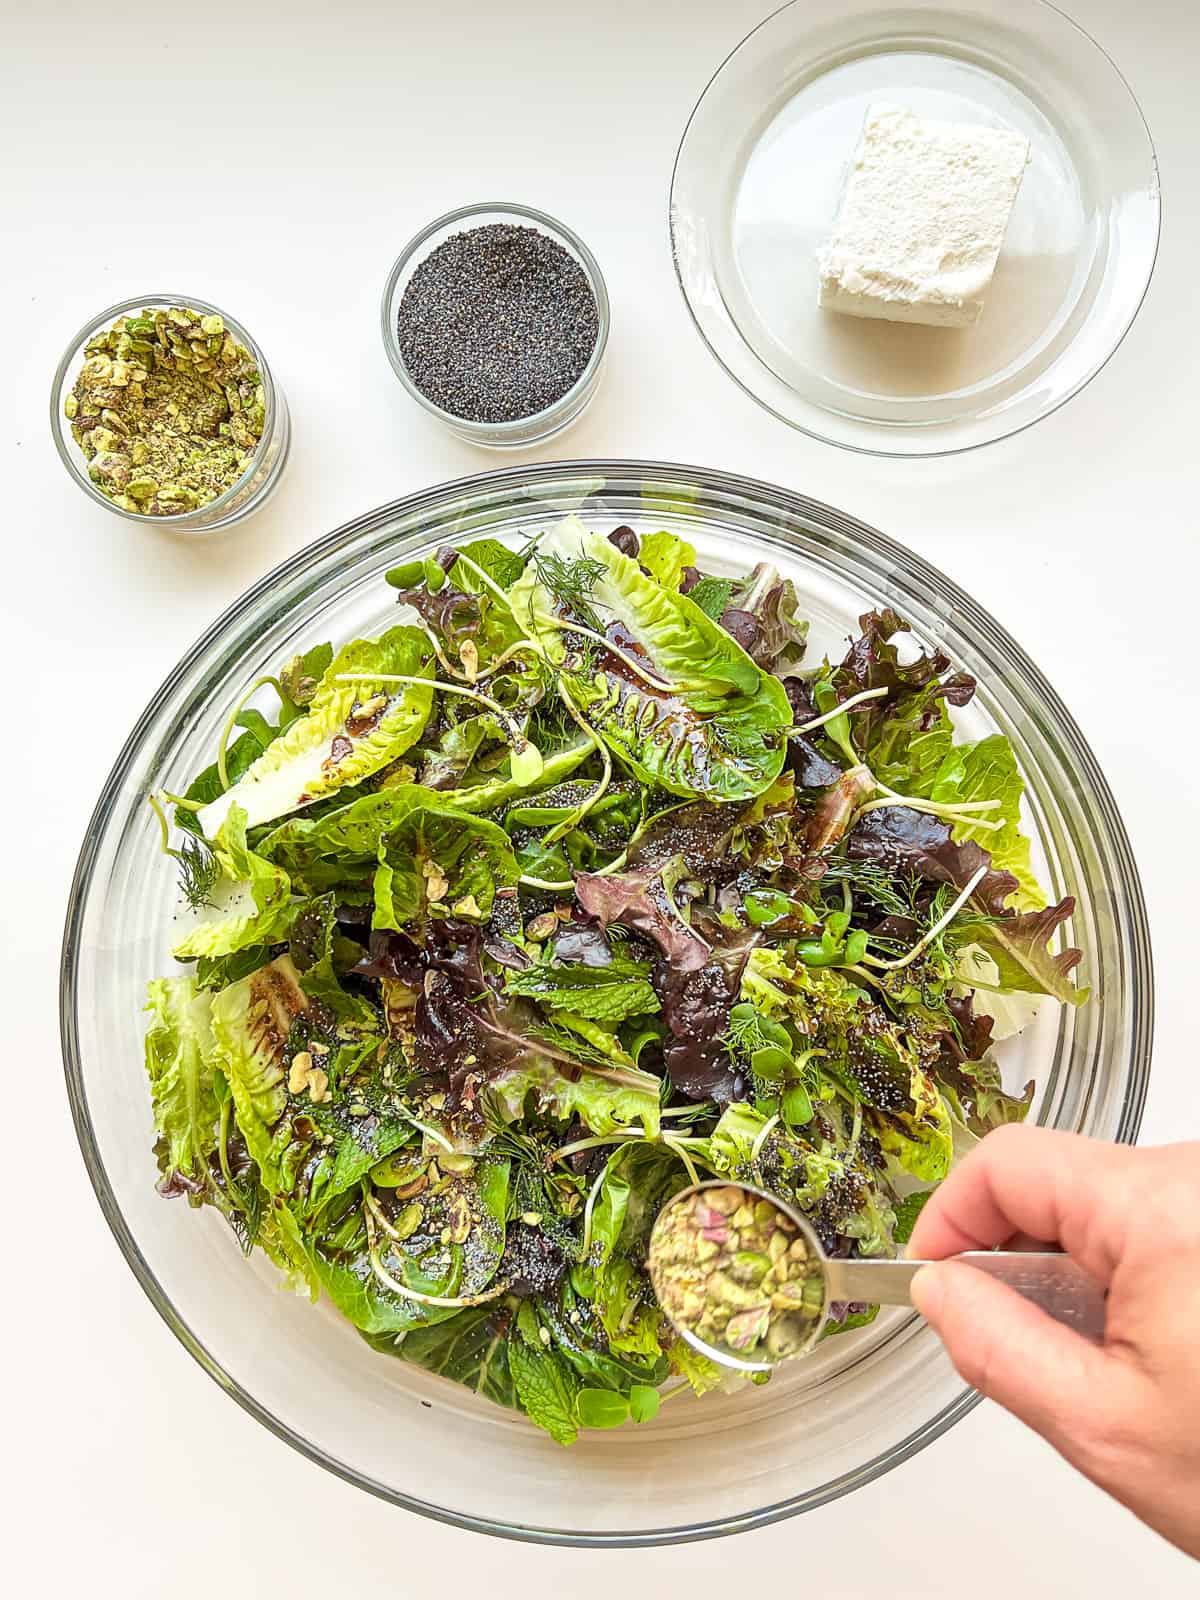 An image of a woman's hand sprinkling crushed pistachios over a salad.